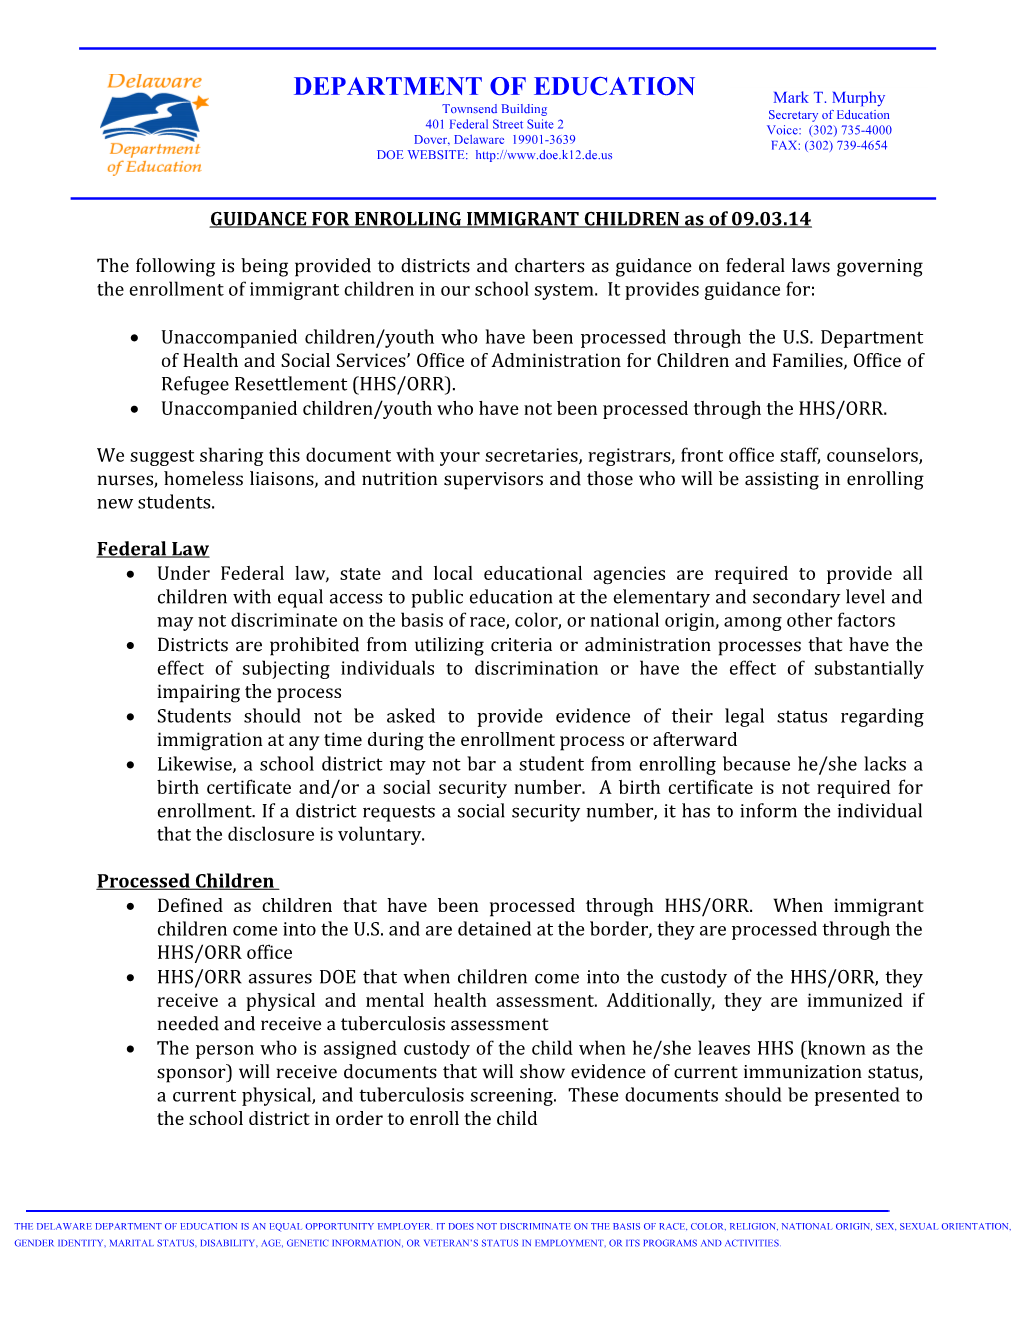 GUIDANCE for ENROLLING IMMIGRANT CHILDREN As of 09.03.14